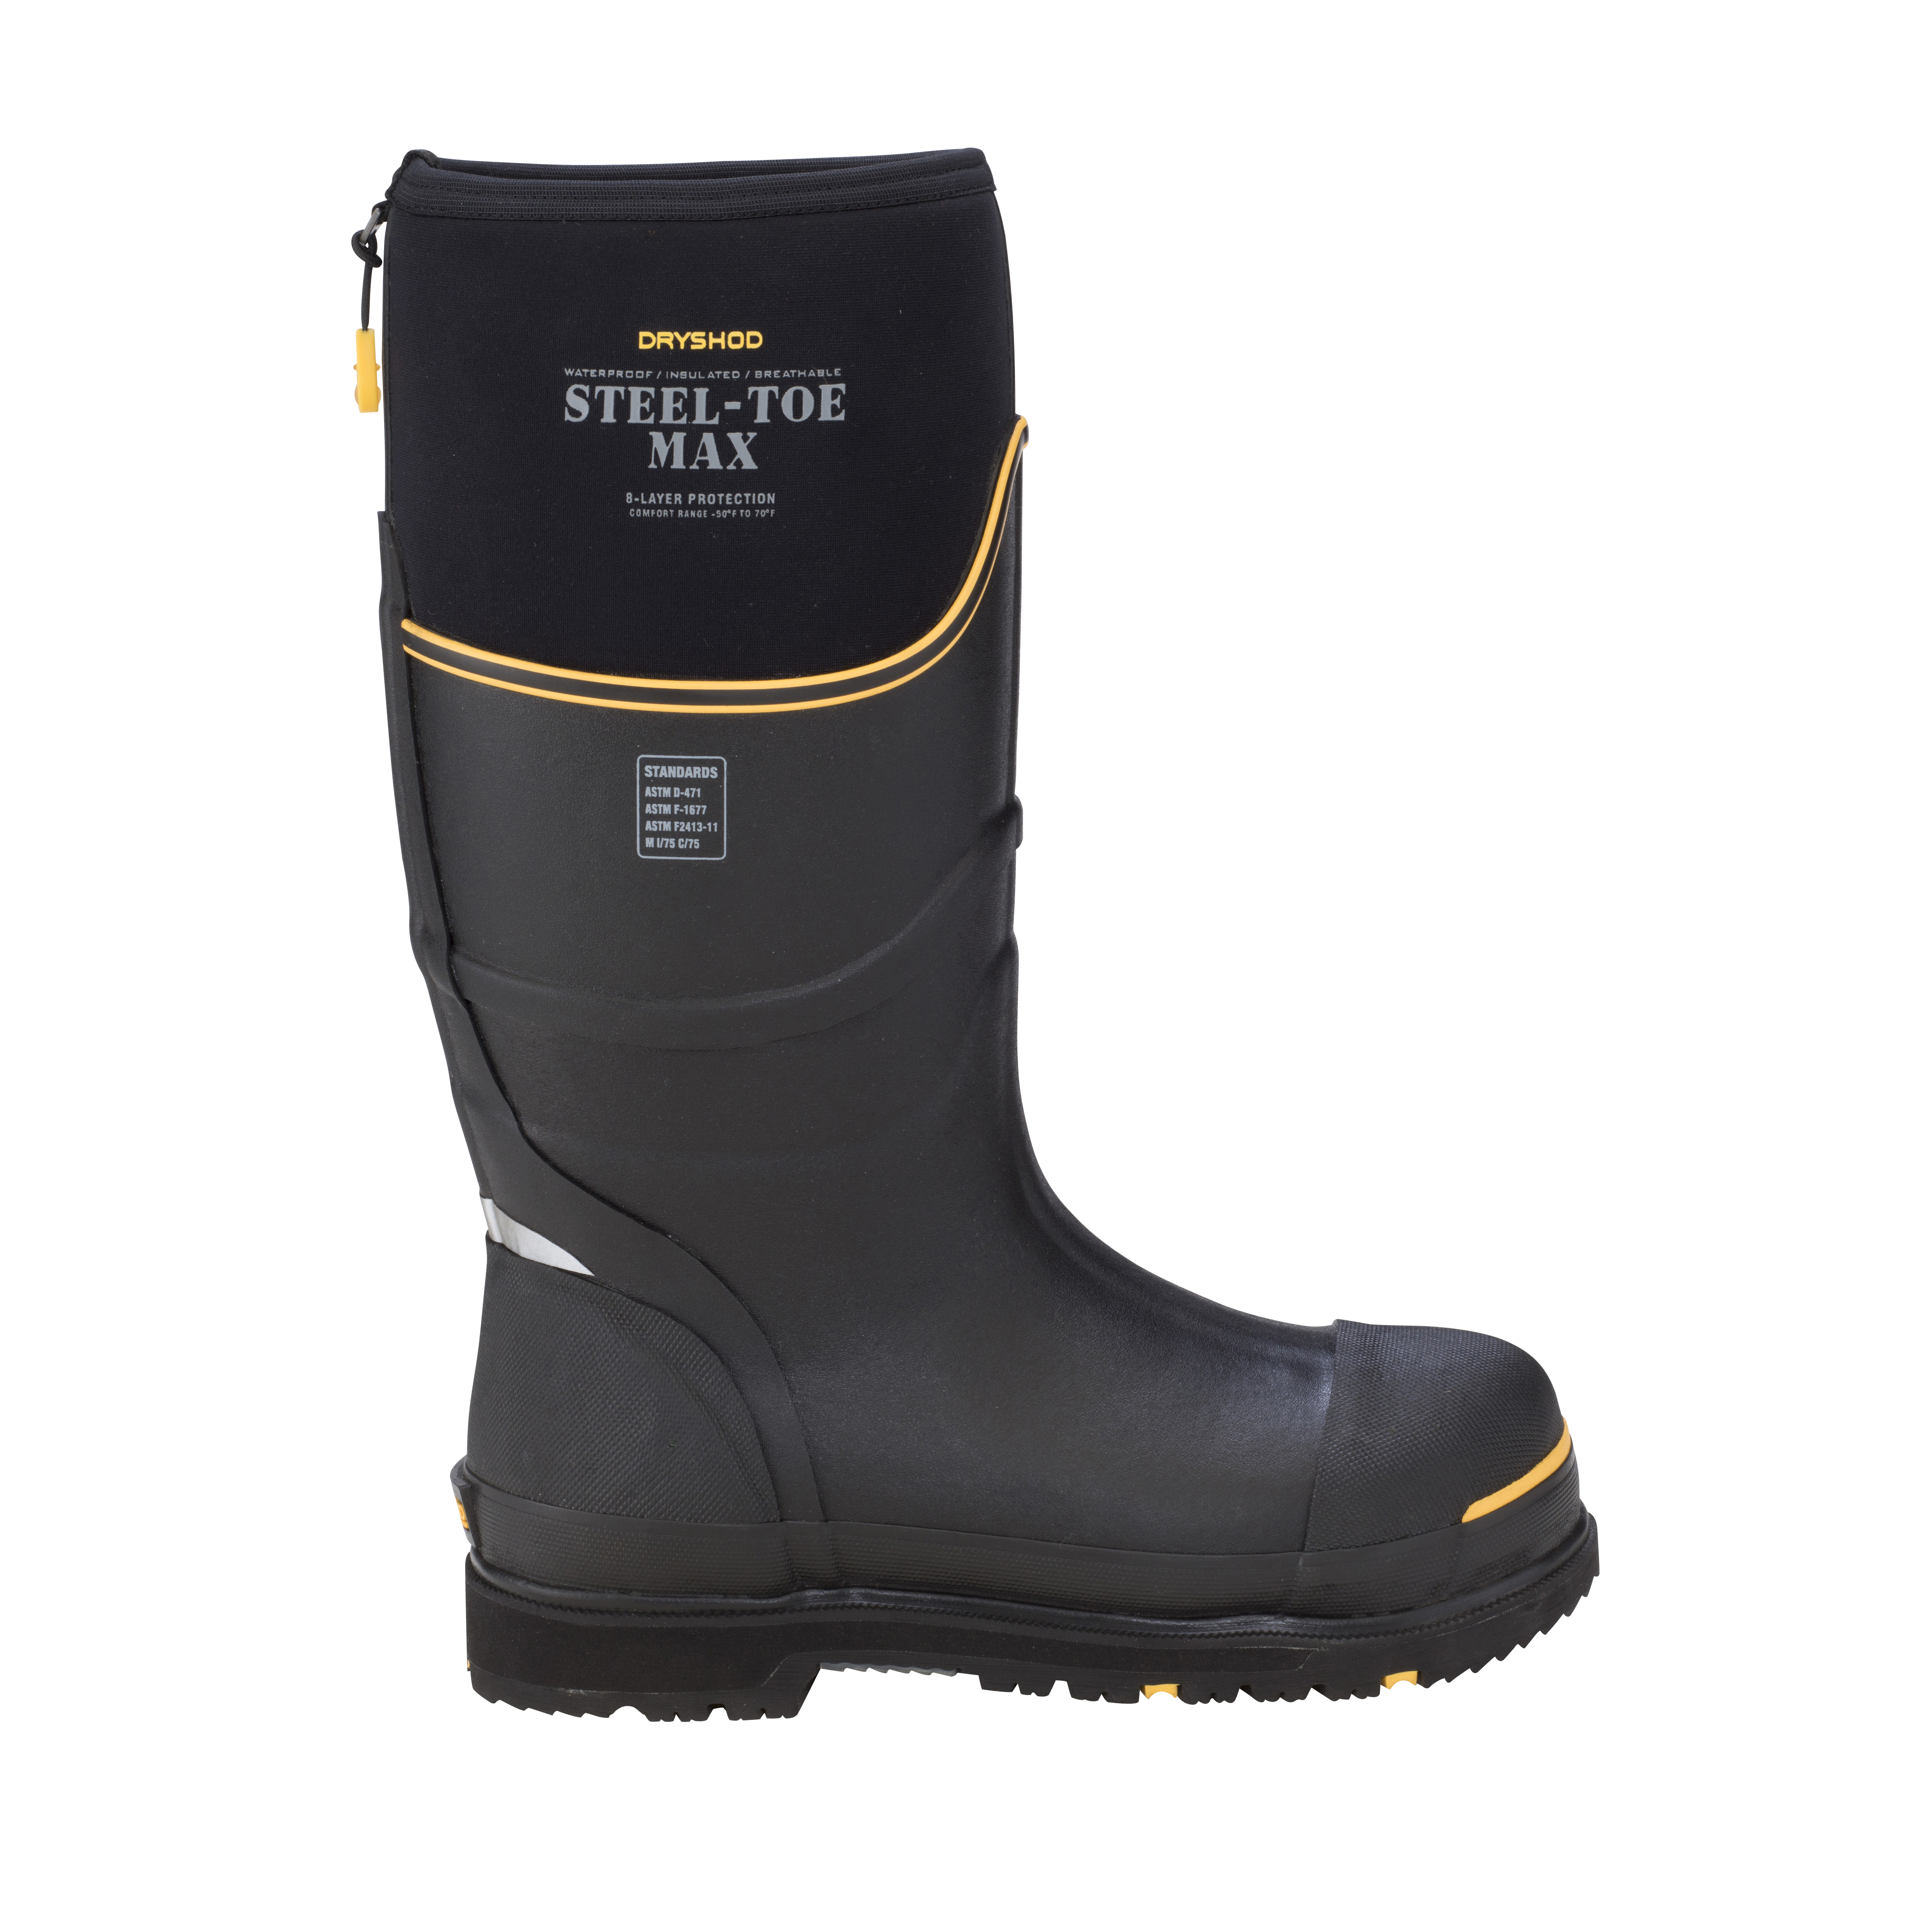 Buy > extreme cold weather steel toe boots > in stock